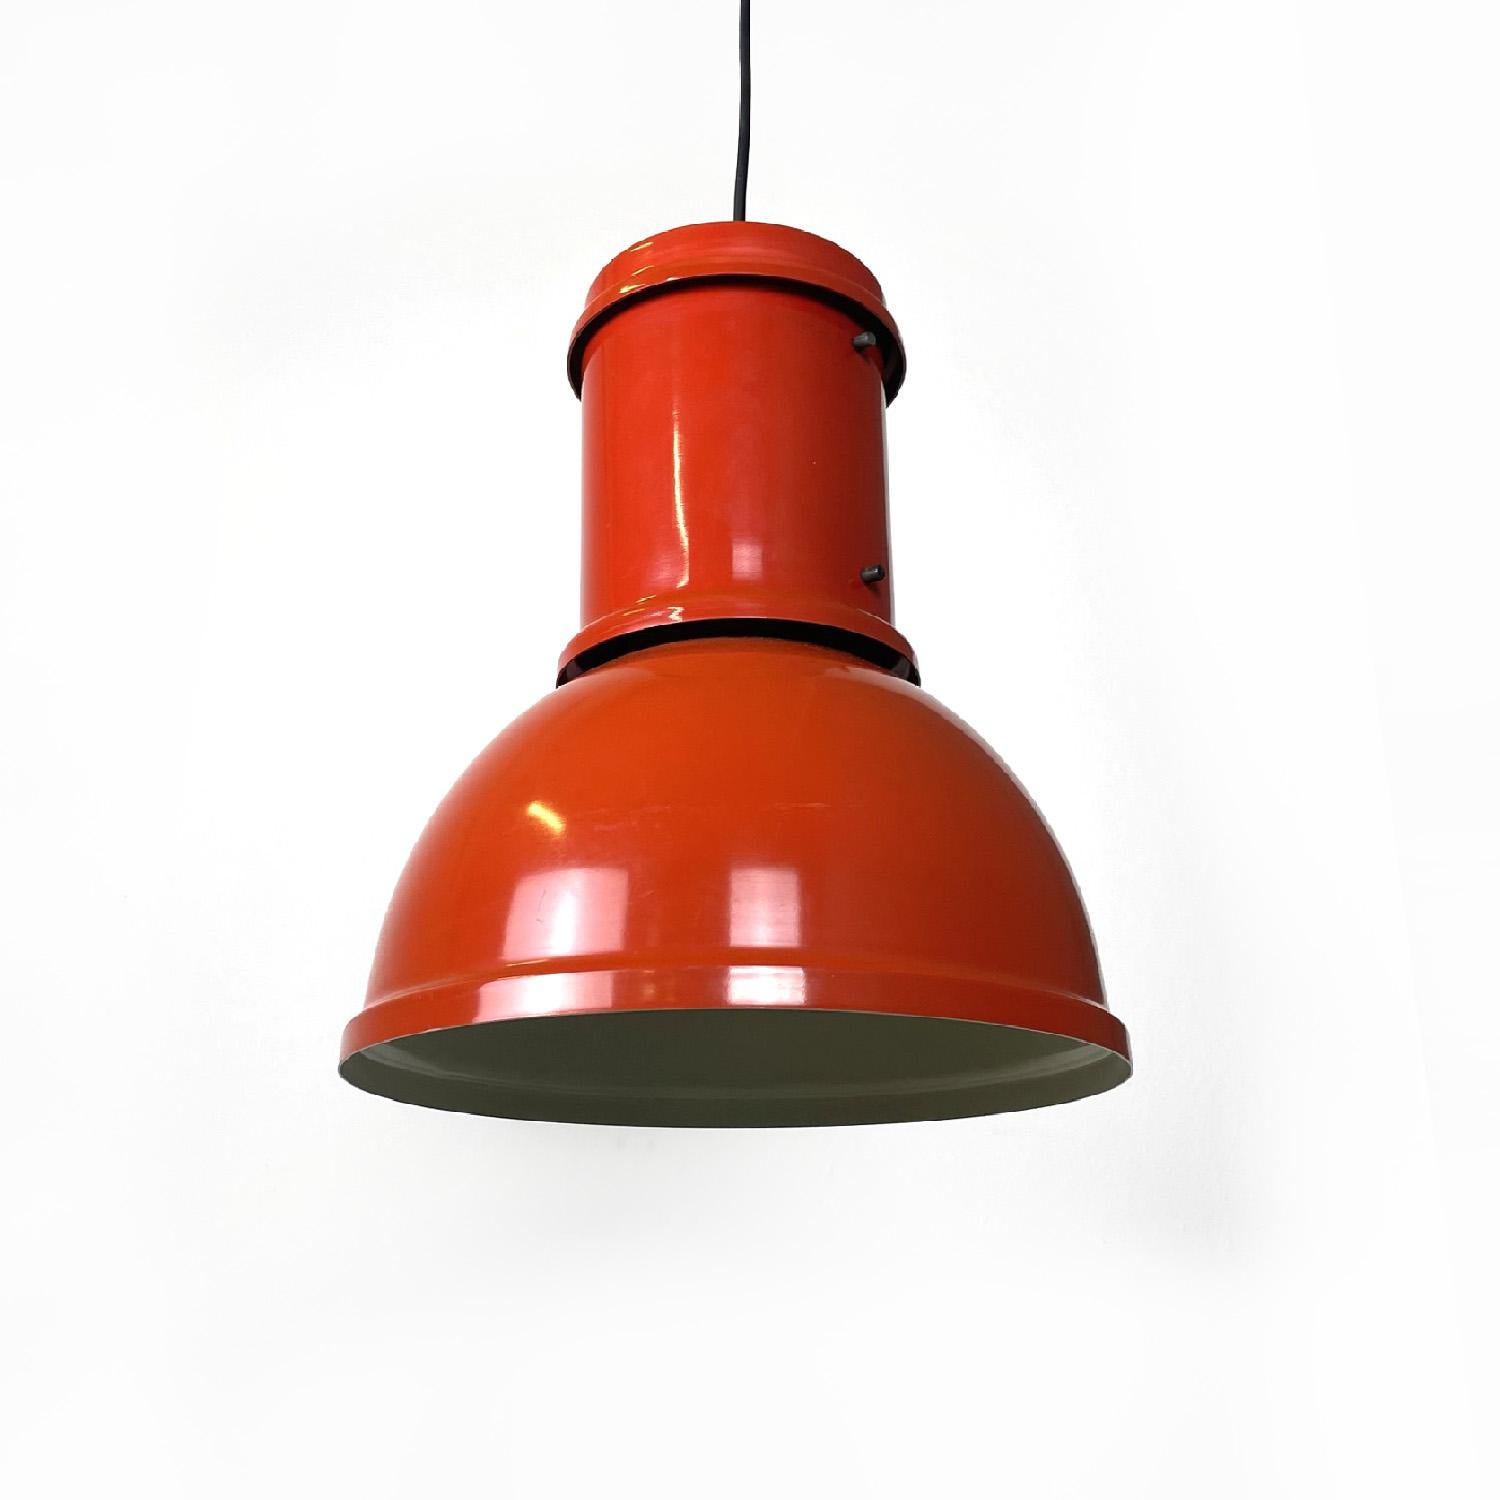 Italian red chandelier Lampara by Roberto Menghi for Fontana Arte, 1960s
Chandelier mod. Lampara with round base in orange-red lacquered aluminum. It has a dome-shaped lampshade lacquered white internally, in the upper part there is a cylindrical